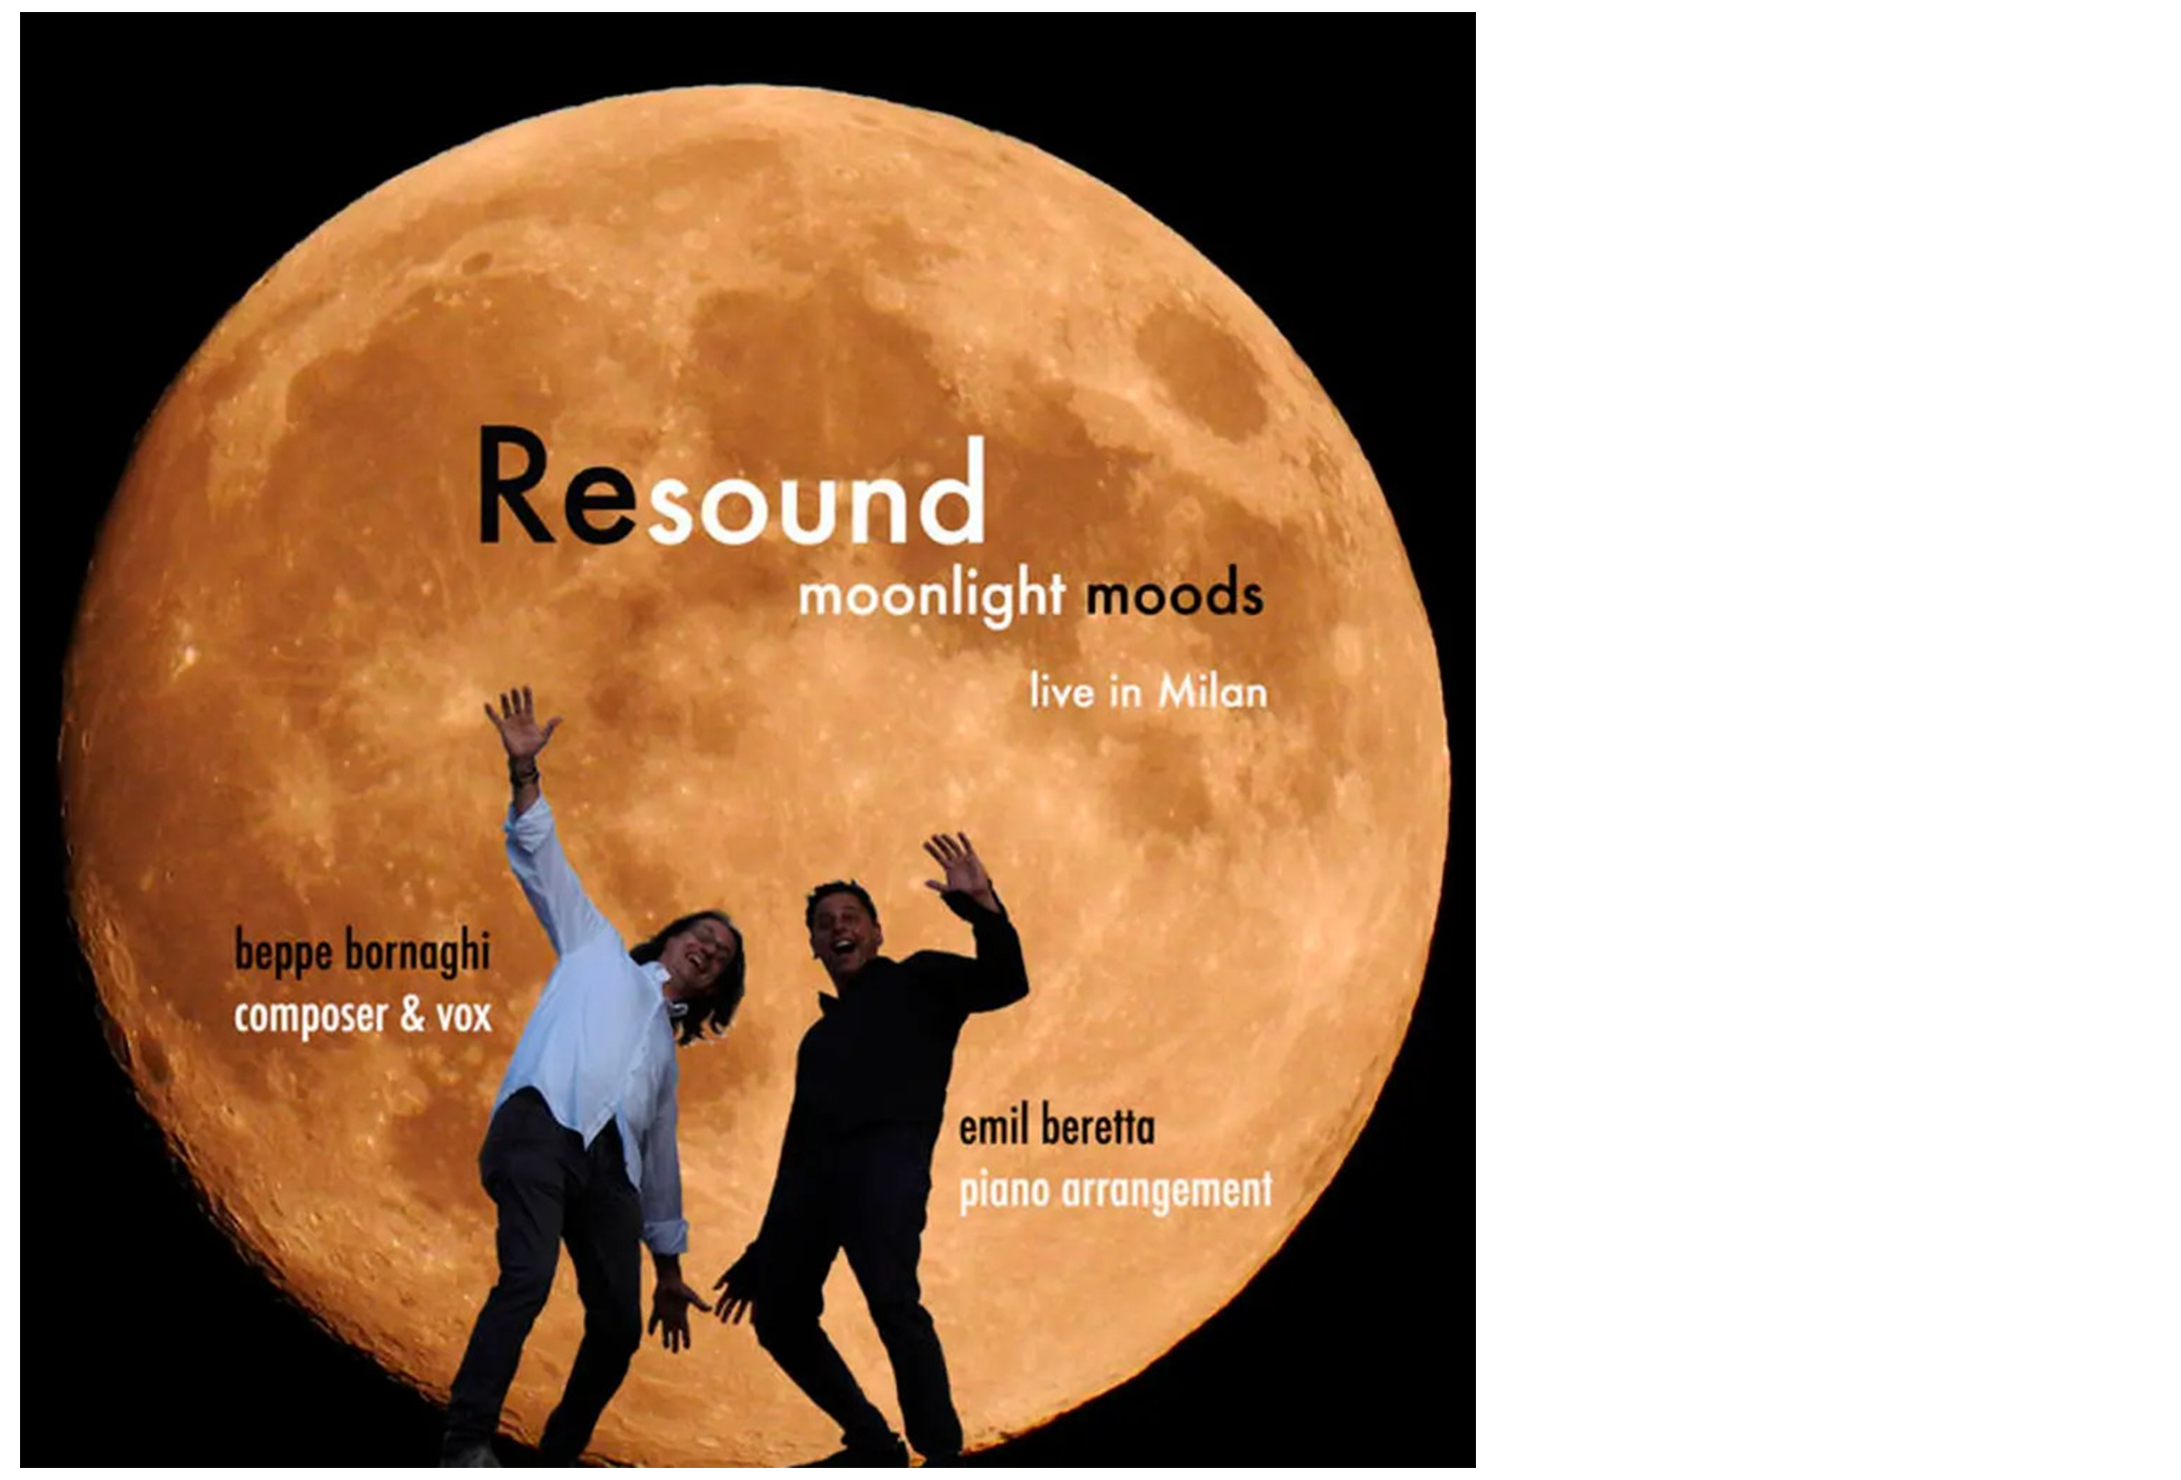 Resound moonlight moods di Beppe Bornaghi